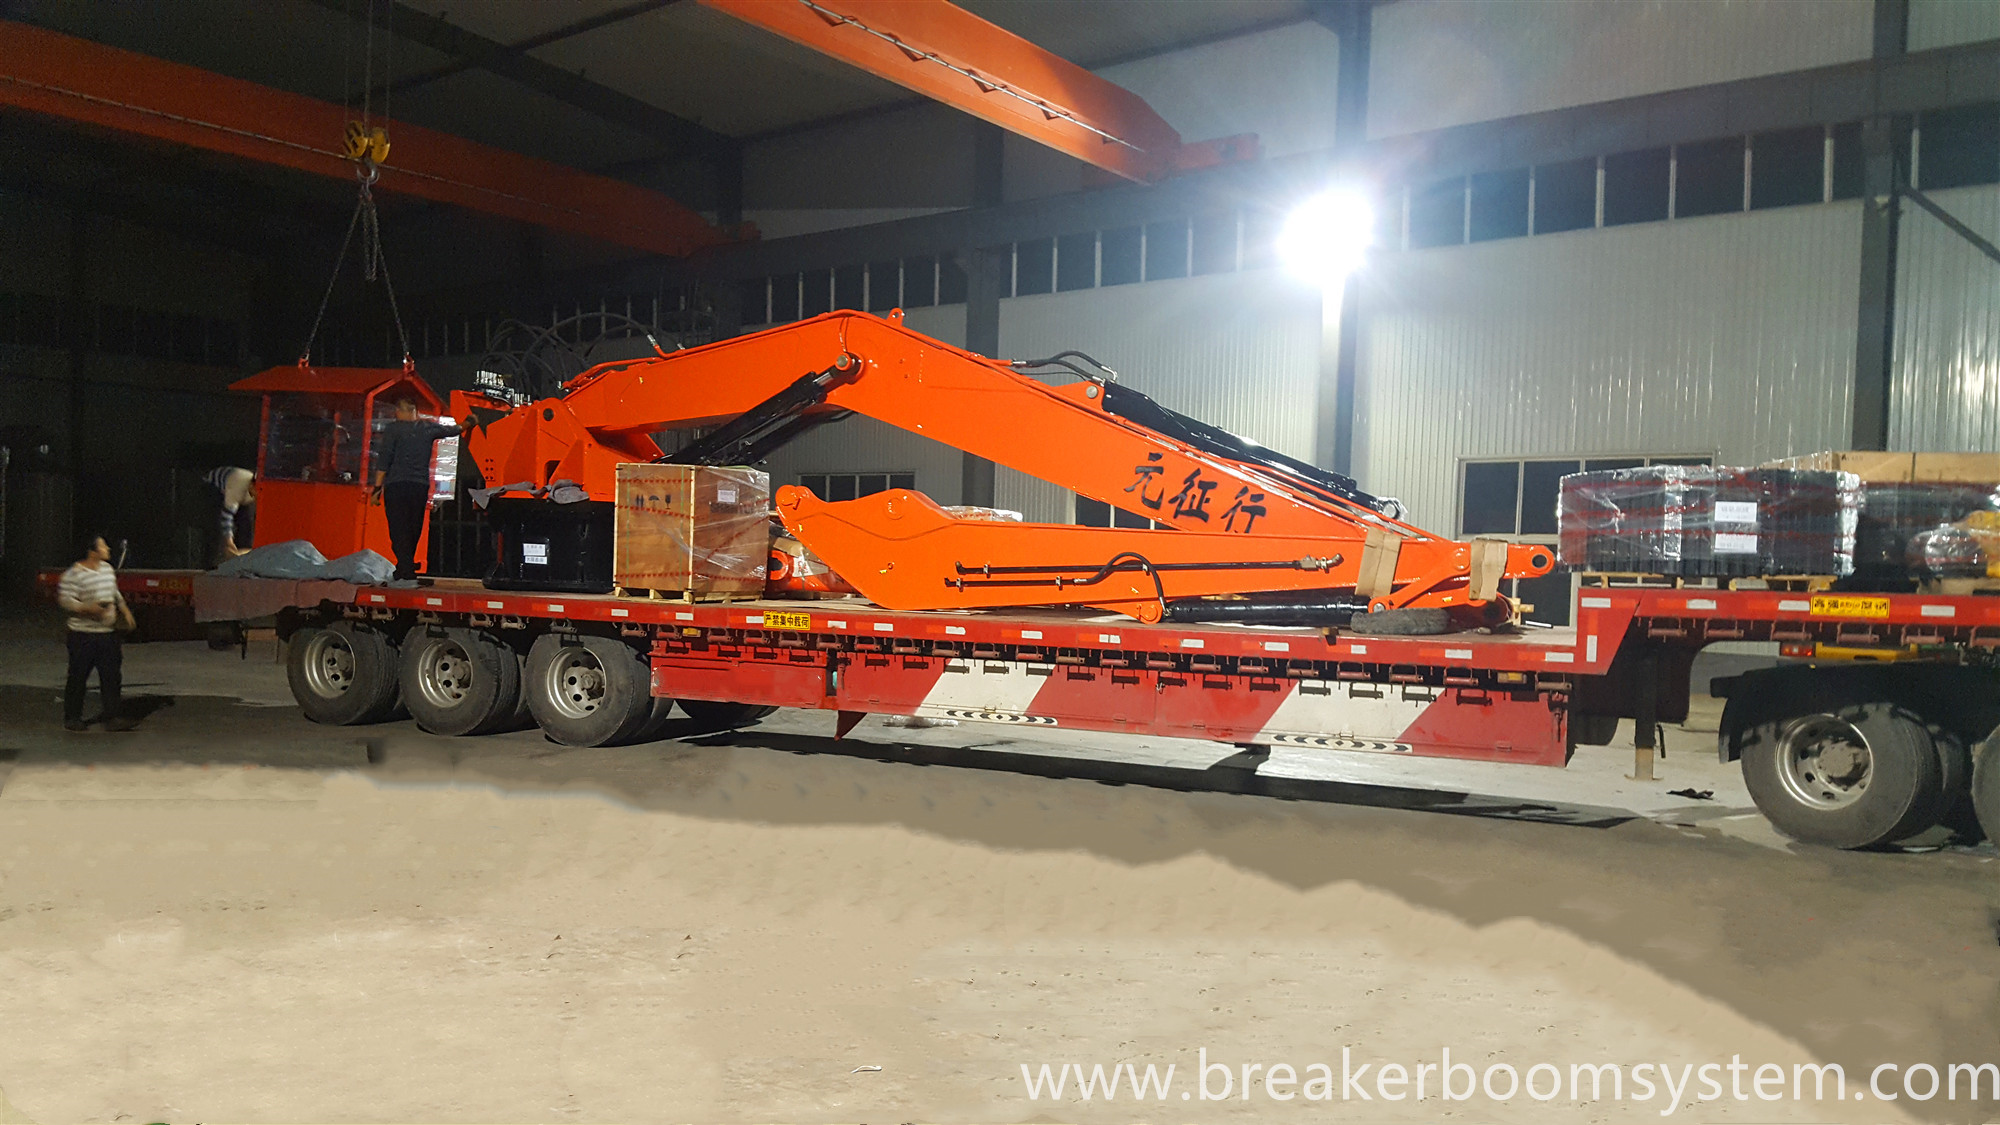 stationary rock breaker booms systems